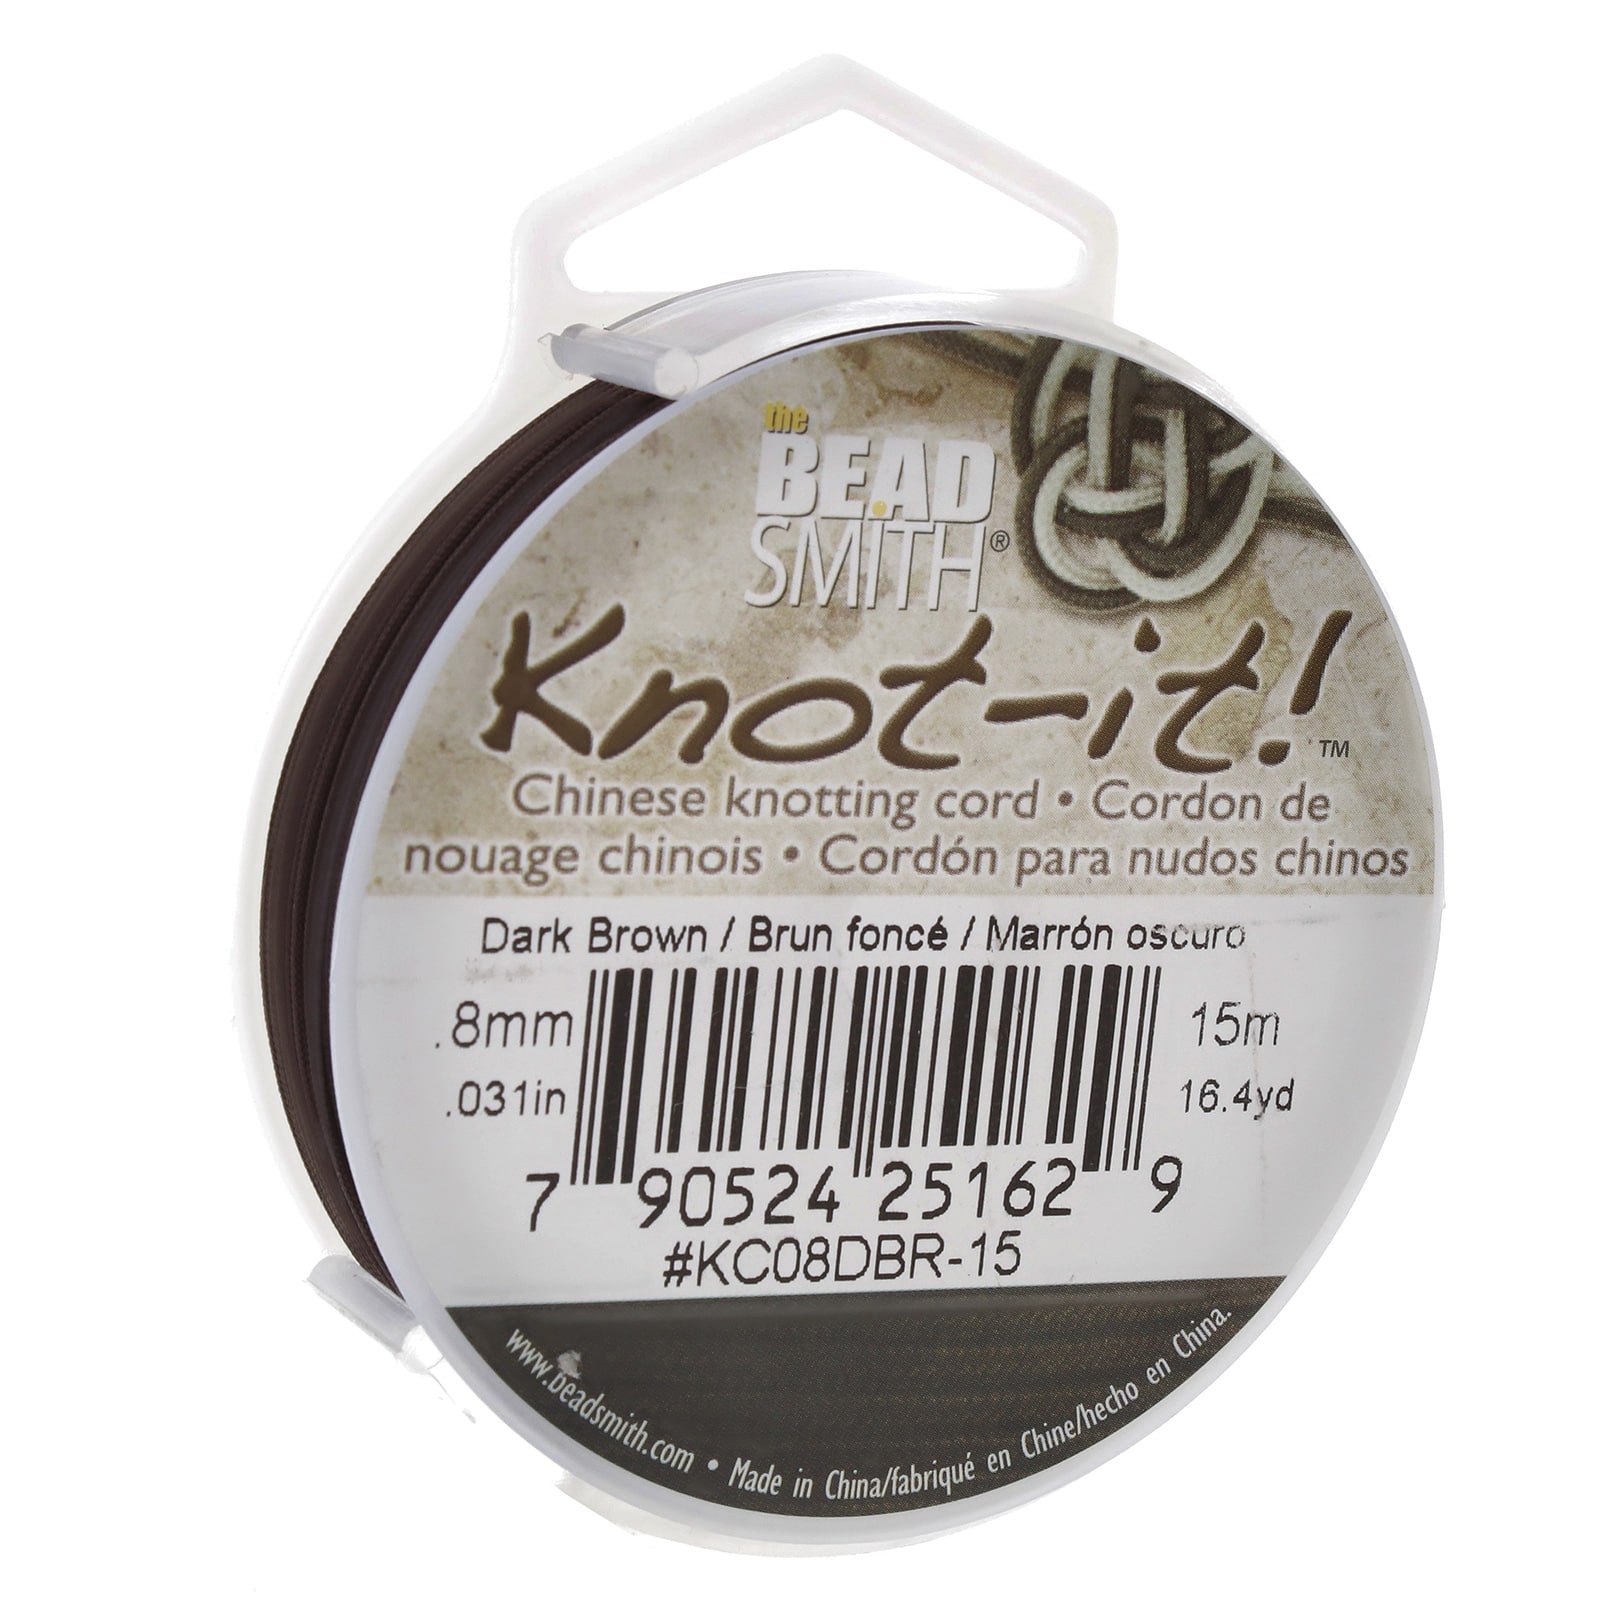 The Beadsmith® Knot-it!™ 0.8mm Chinese Knotting Cord